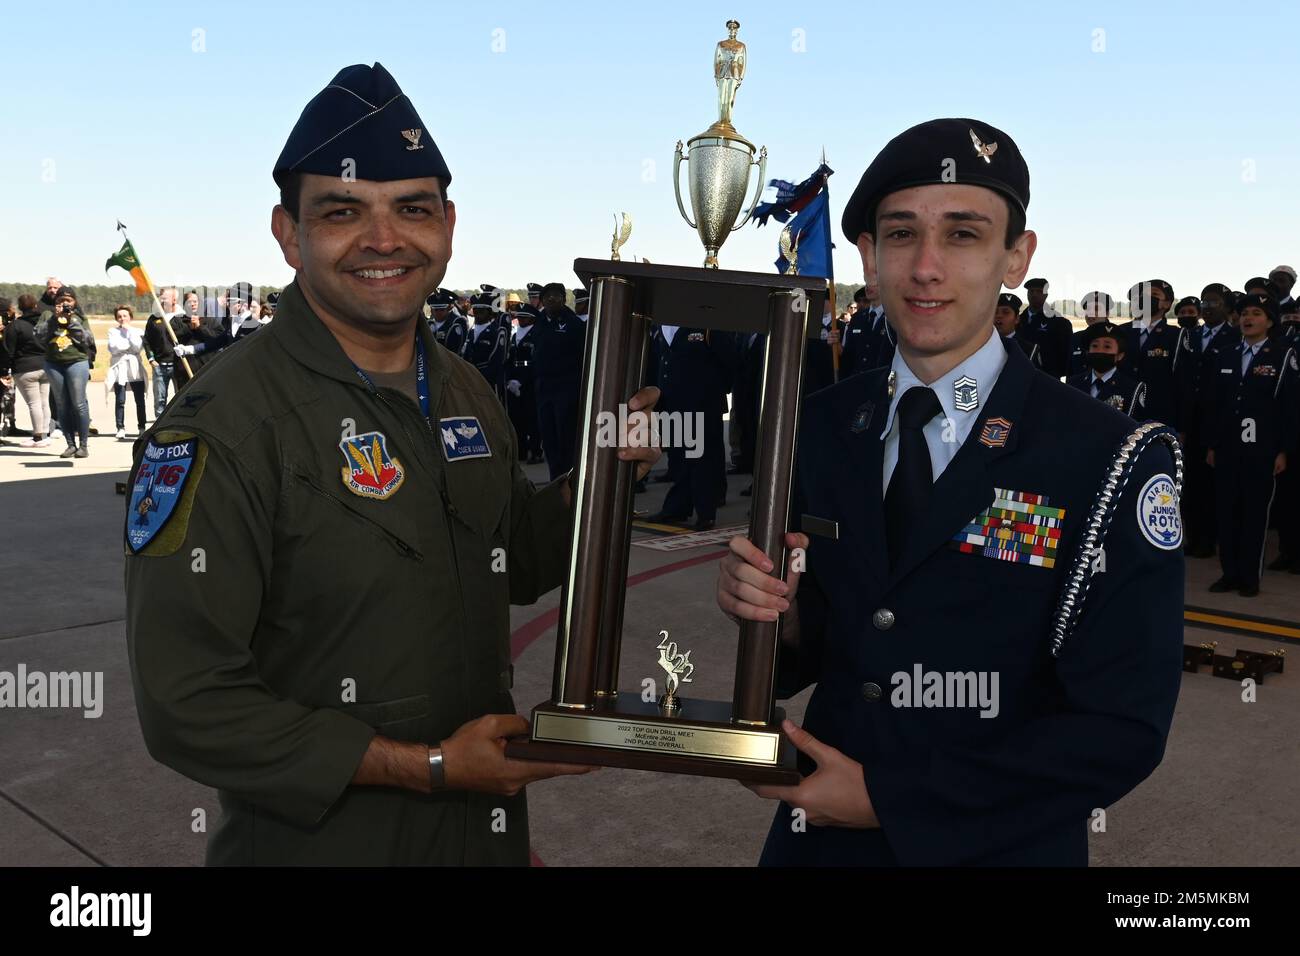 U.S. Air Force Col. Quaid Quadri, 169th Fighter Wing commander, presents the second overall trophy for the competition to Fort Dorchester High School during the annual Top Gun Drill Meet at McEntire Joint National Guard Base, South Carolina, March 26, 2022. High School Junior Reserve Officers Training Corps cadets from twenty high schools from across the state competed in twelve drill and ceremony events sponsored by the South Carolina Air National Guard. Stock Photo